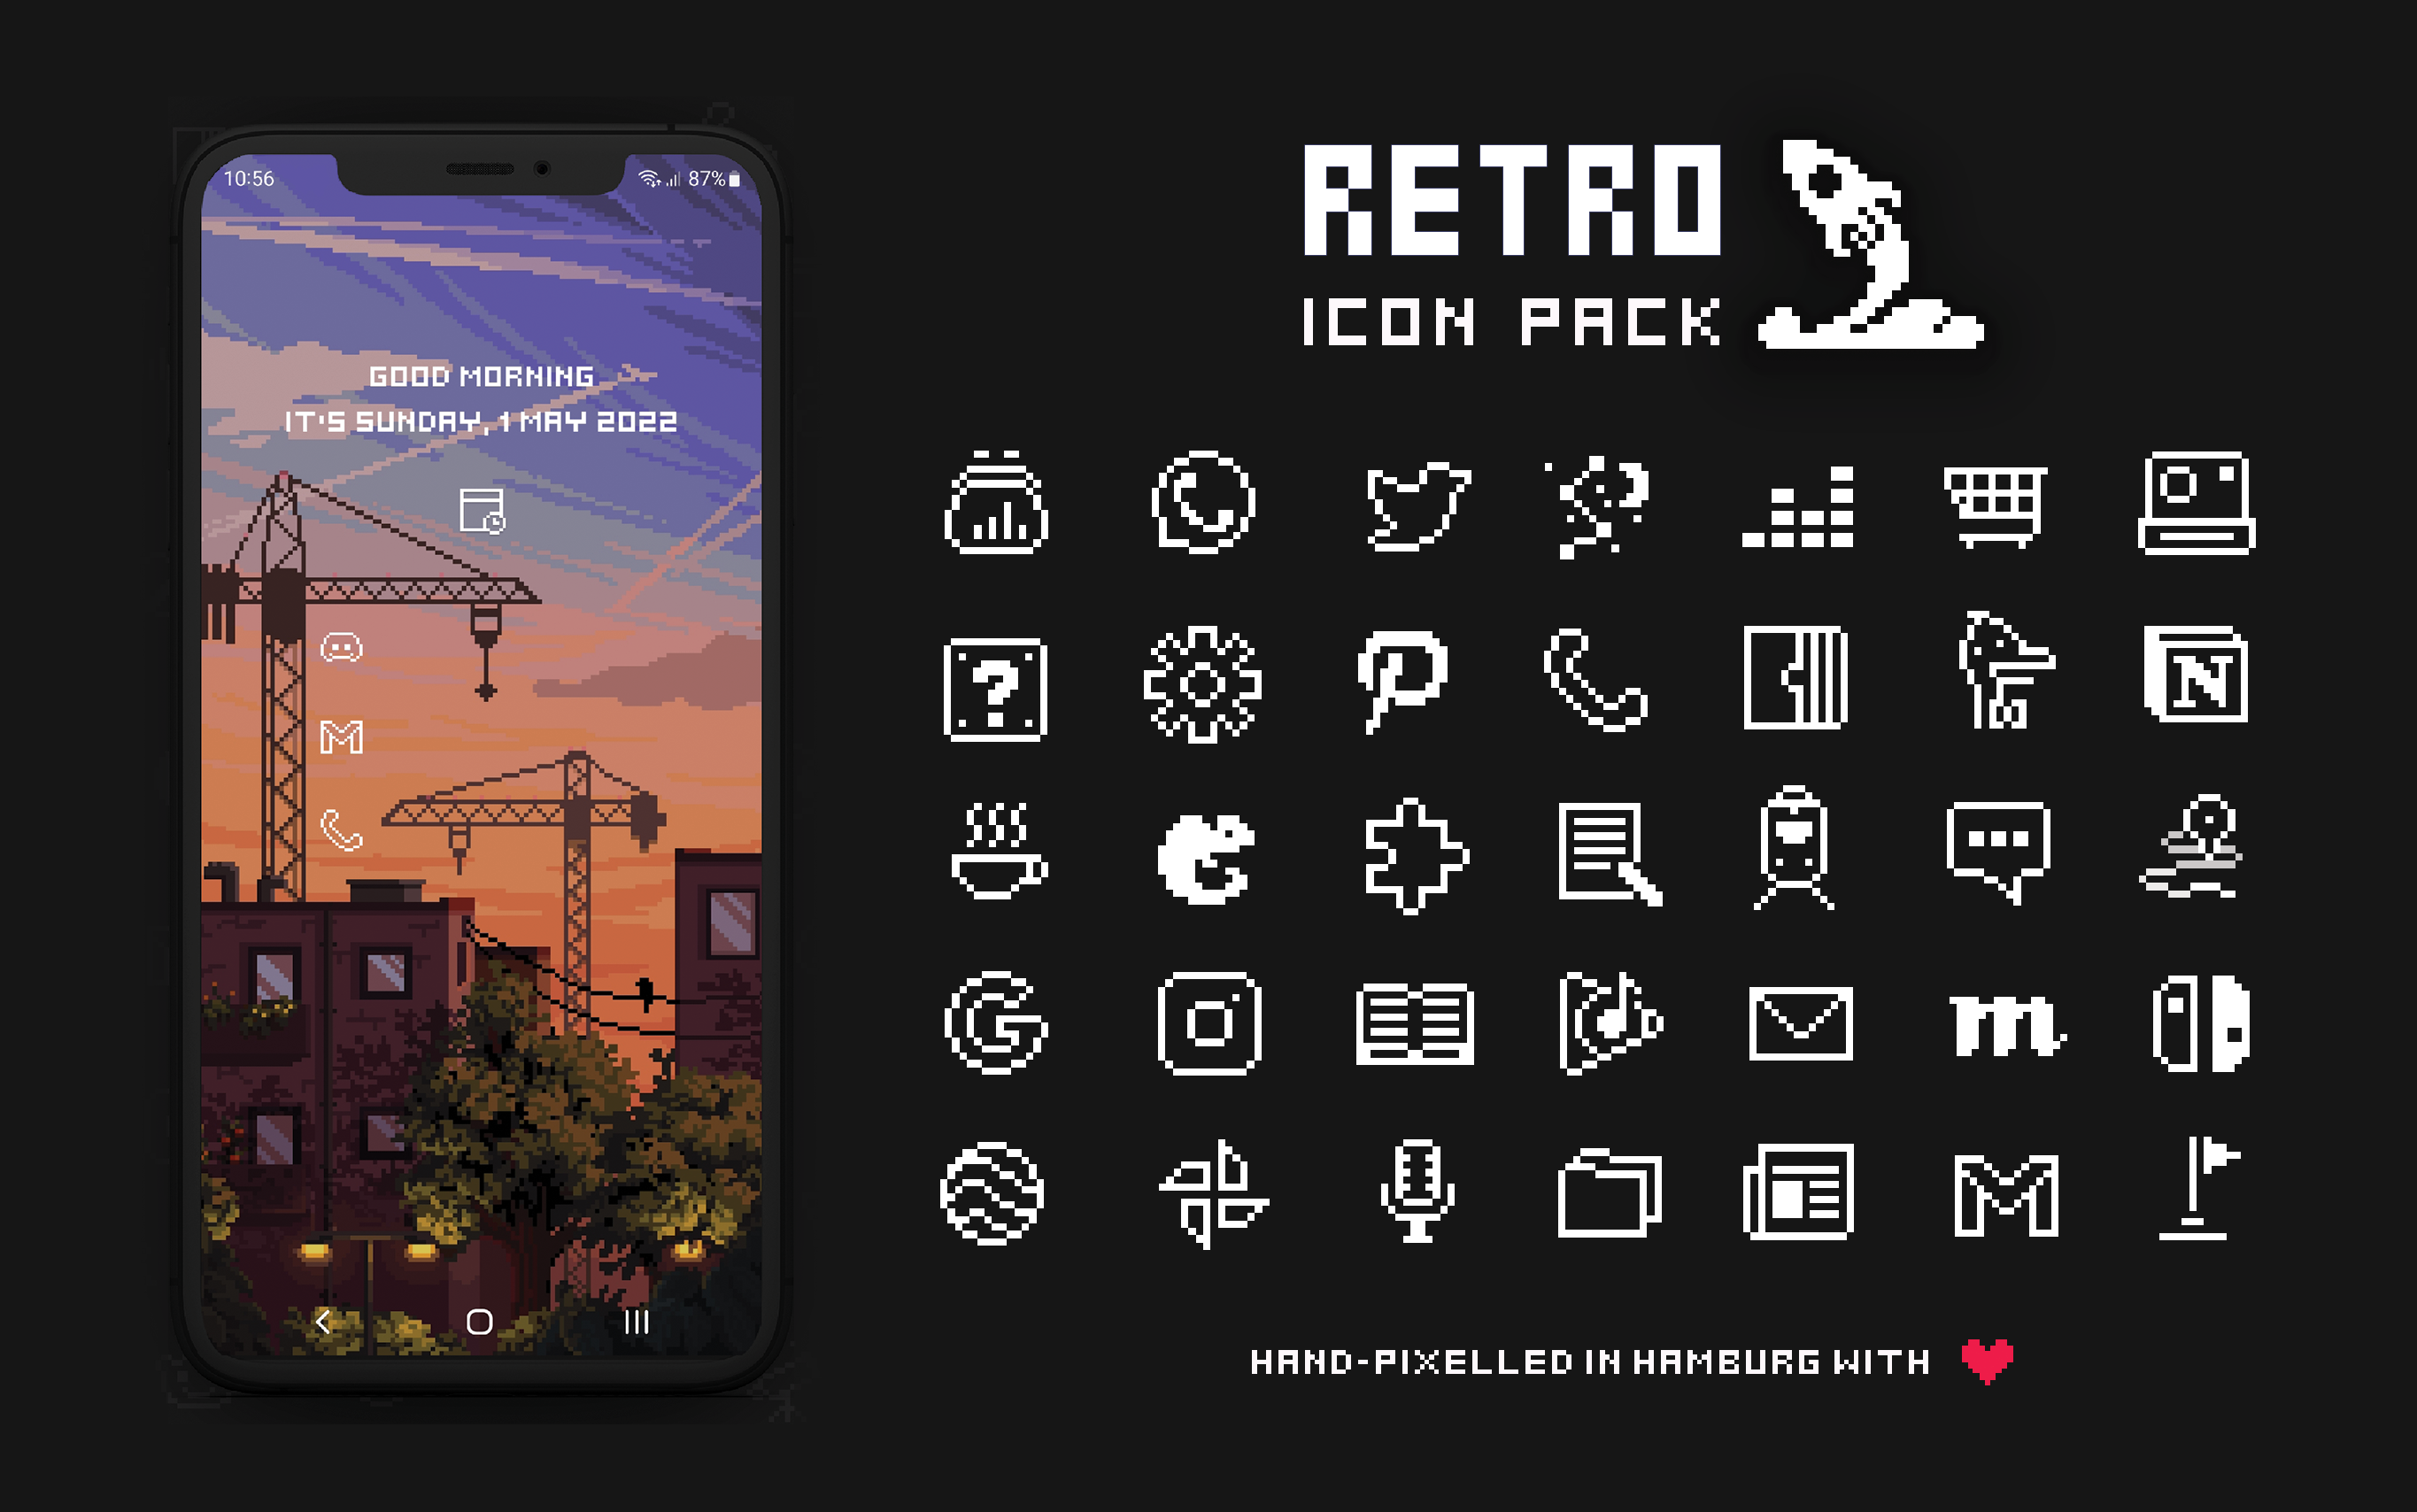 Preview image of the Retro Mode icon pack showing a selection of 30 minimalistic plain white icons alongside a screenshot of a homescreen with an afternoon sunset wallpaper applied and widgets on top.